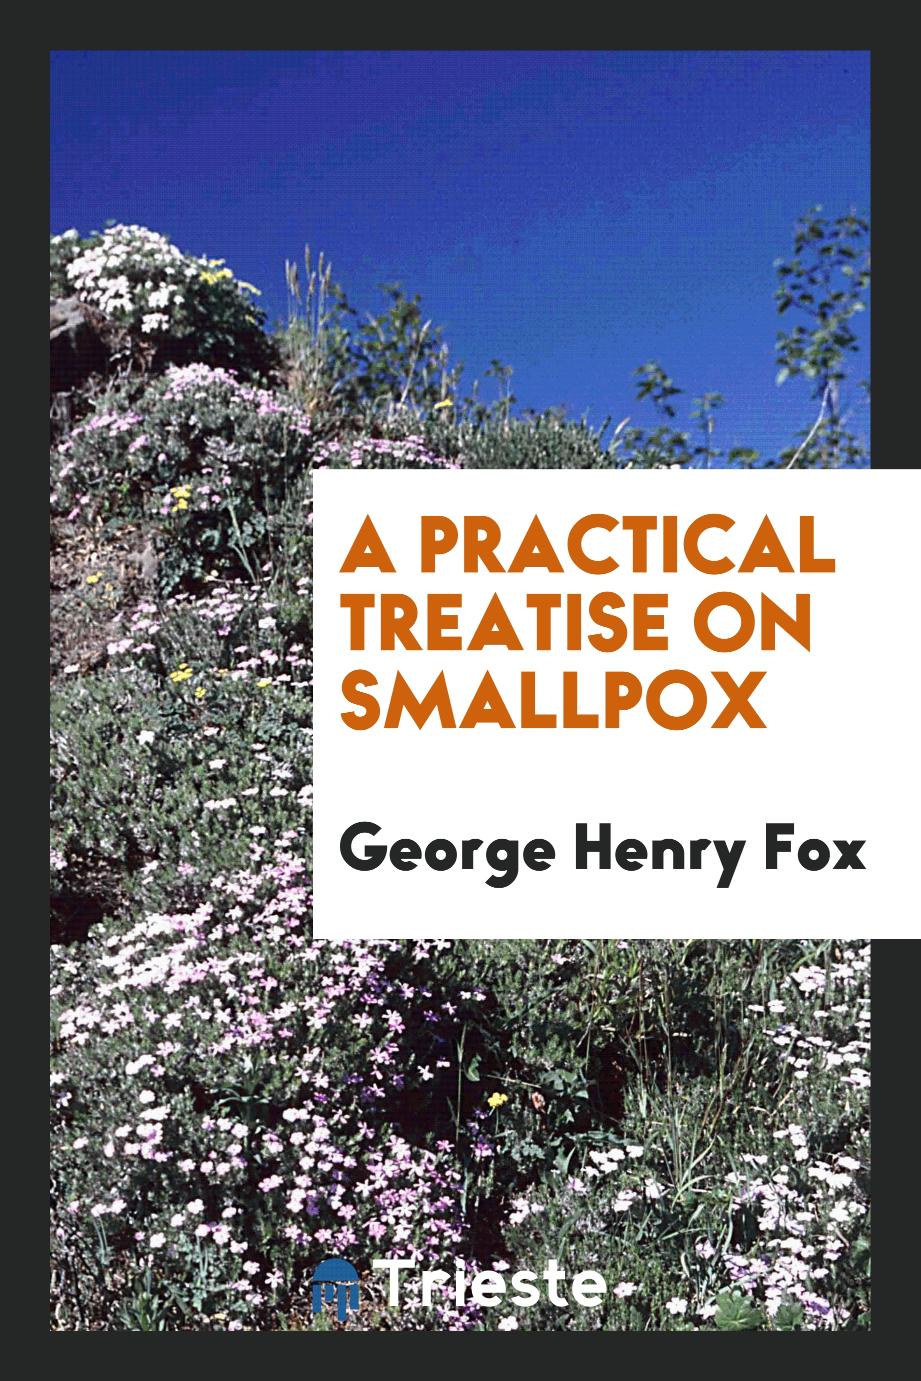 A Practical treatise on smallpox